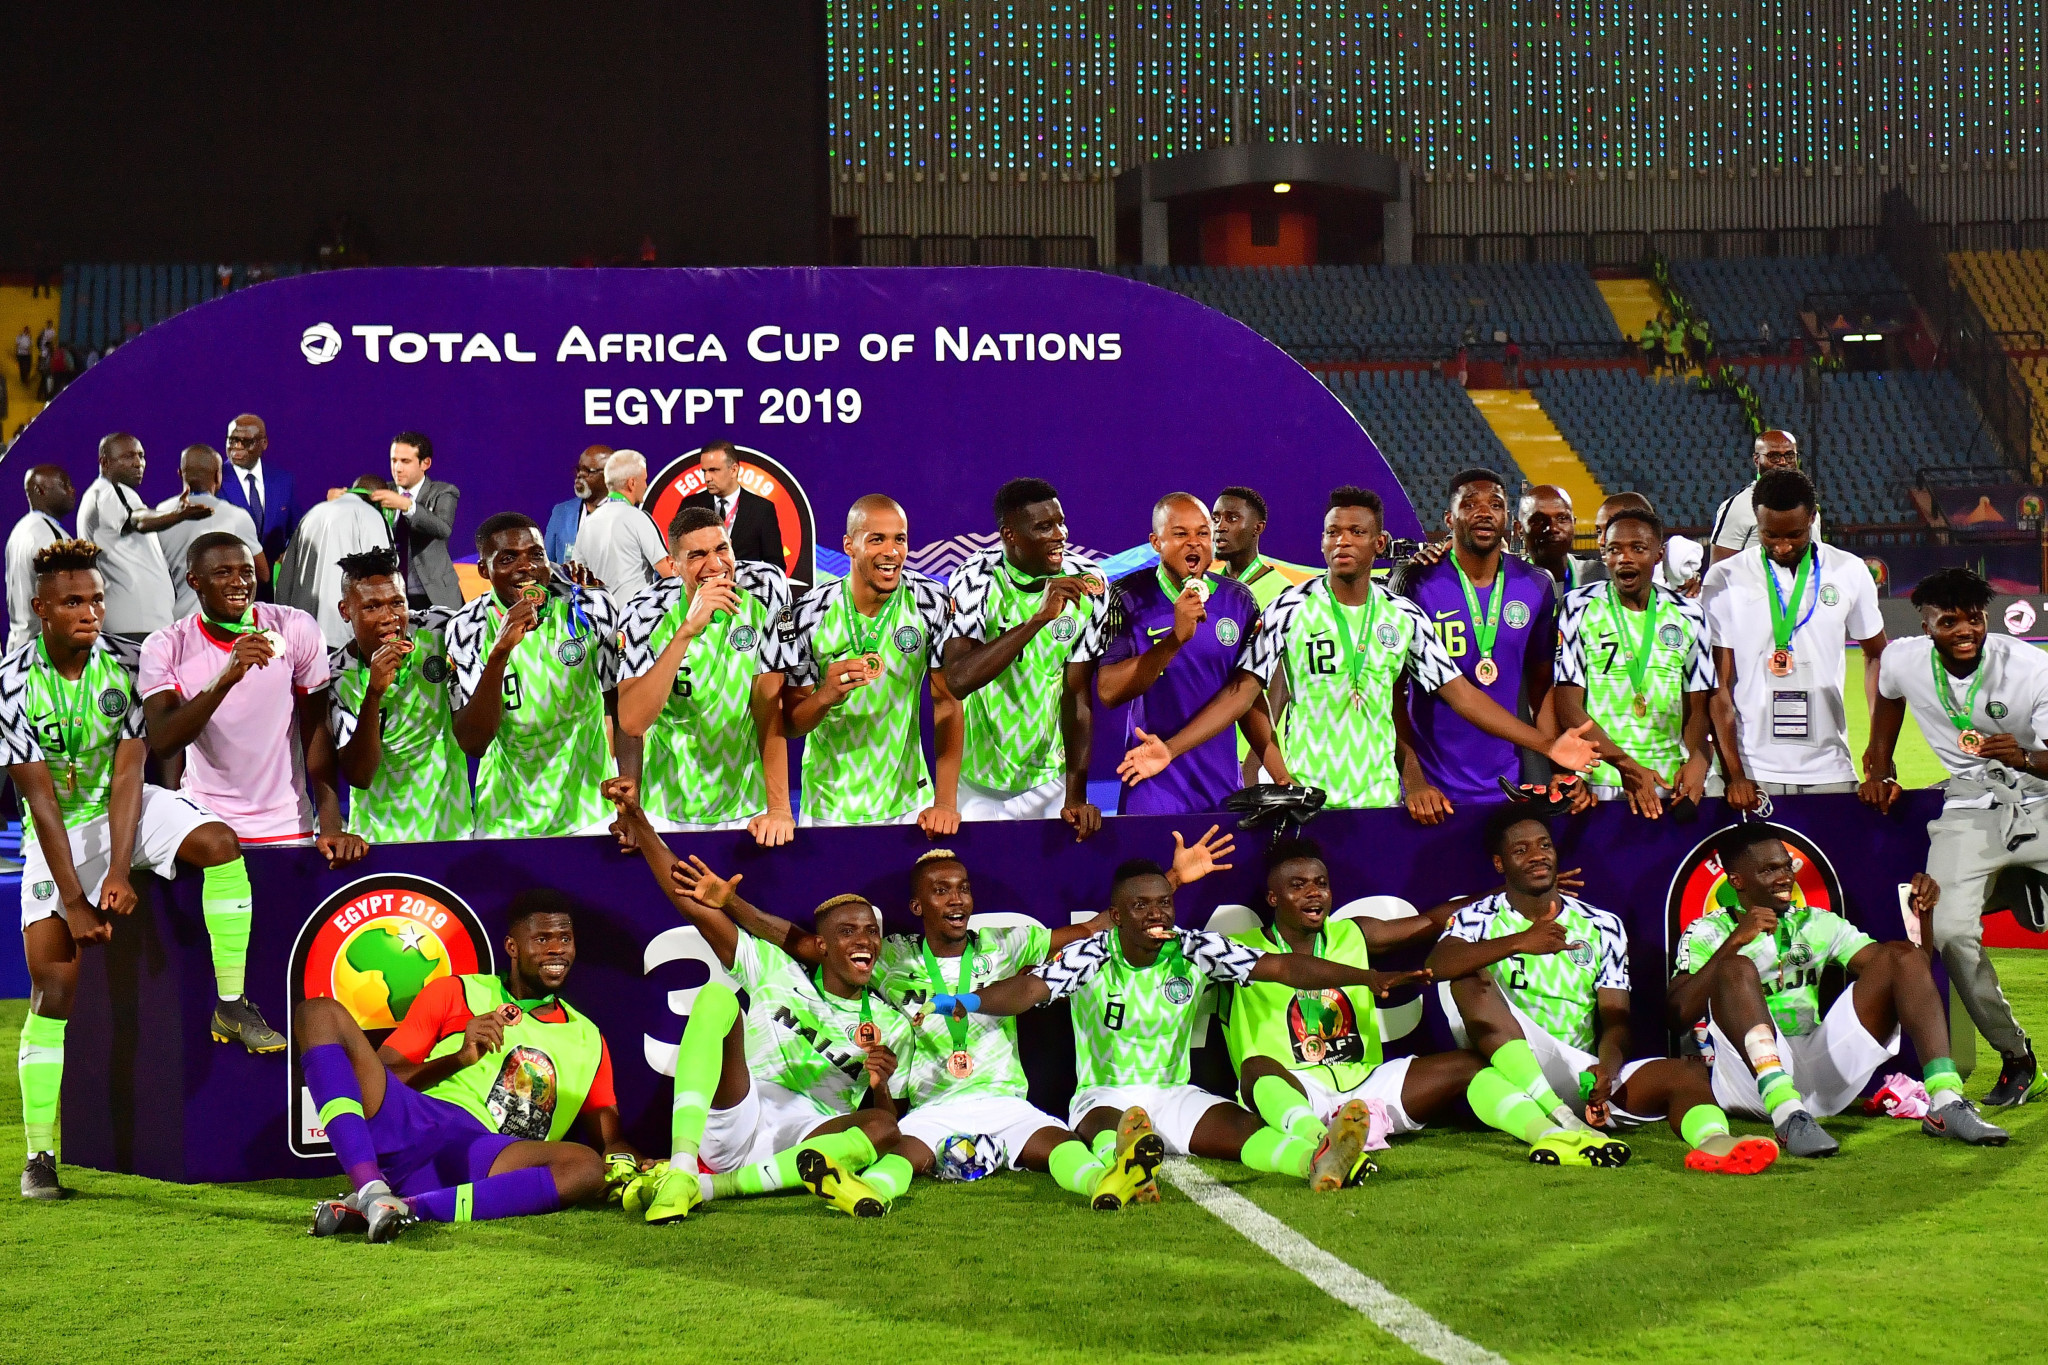 Nigeria were appearing in their eighth bronze medal playoff in the Africa Cup of Nations and maintained their remarkable record of having won on each occasion with their victory in Cairo ©Getty Images